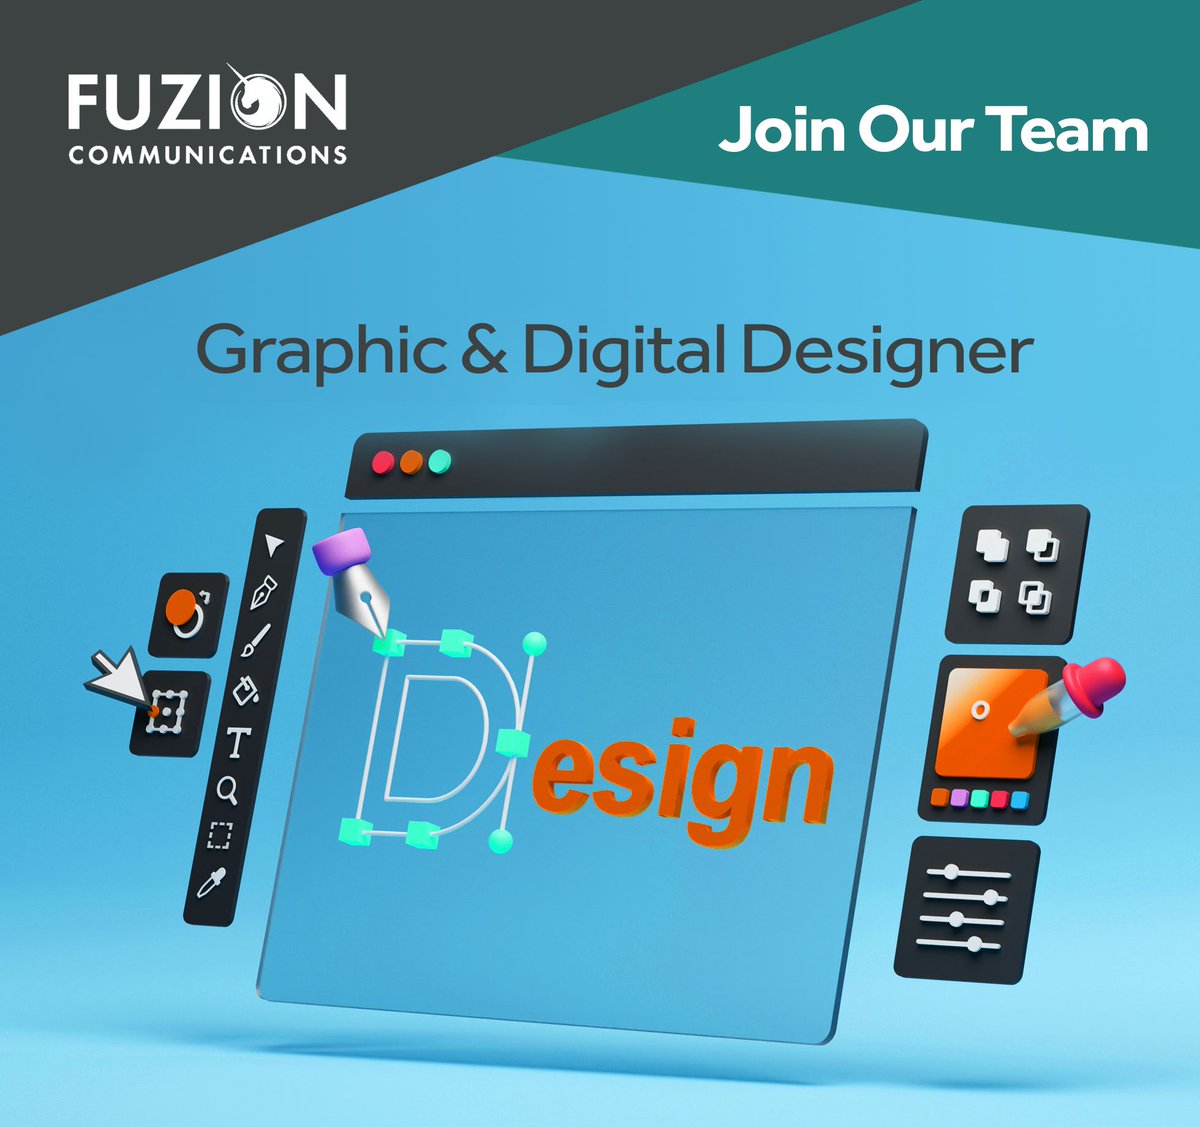 We are hiring !! We have a position for an experienced Graphic\Digital Designer in either our Dublin or Cork offices (hybrid work model) - a fantastic opportunity for the right person #WinHappy